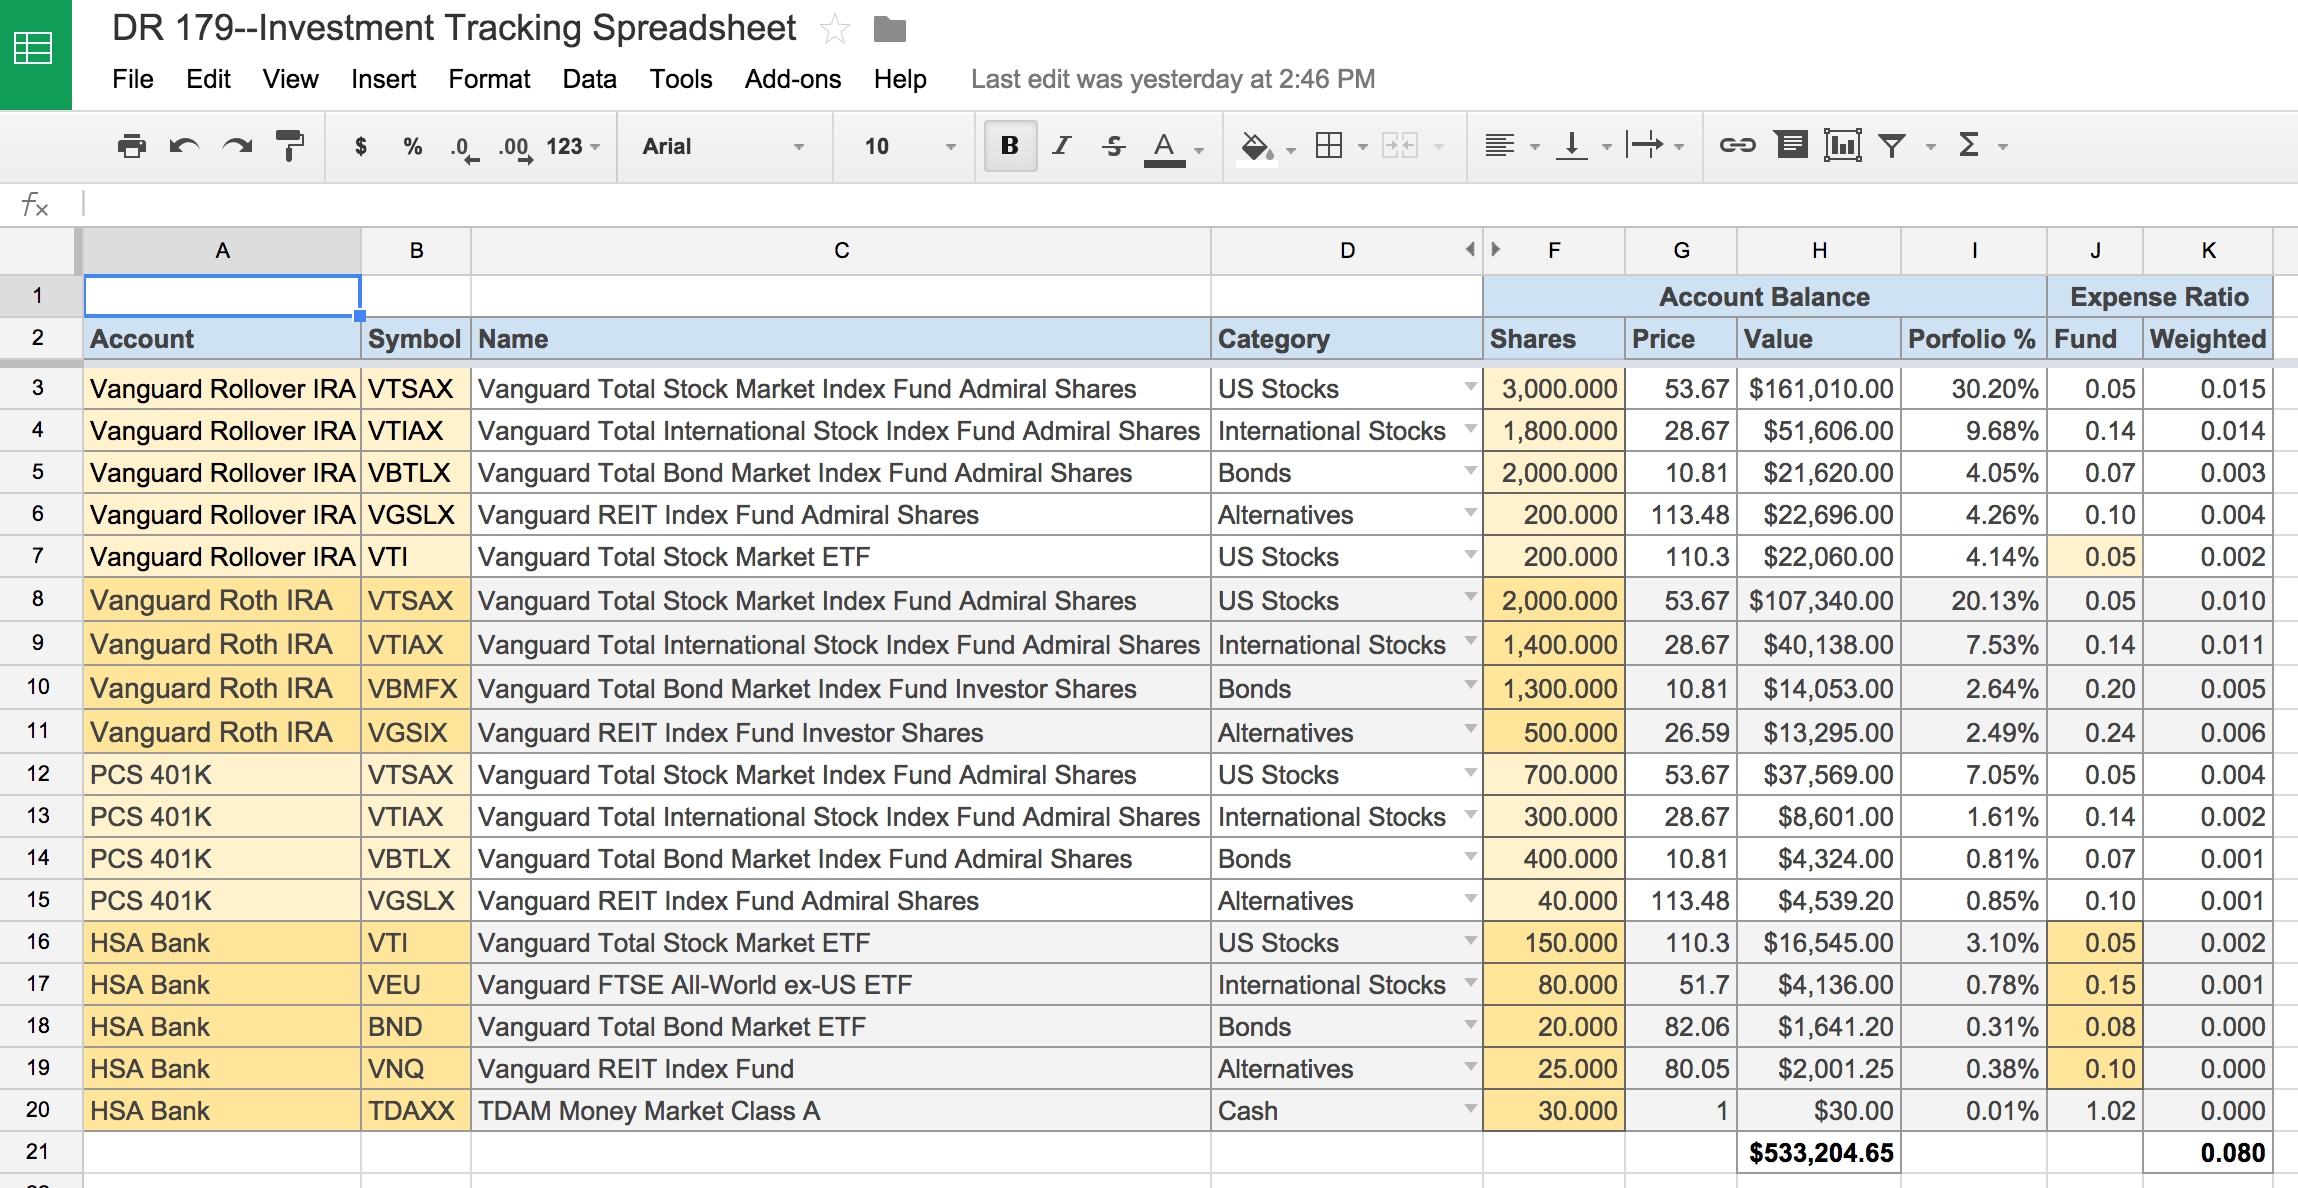 Profit Sharing Formula Spreadsheet in An Awesome And Free Investment Tracking Spreadsheet